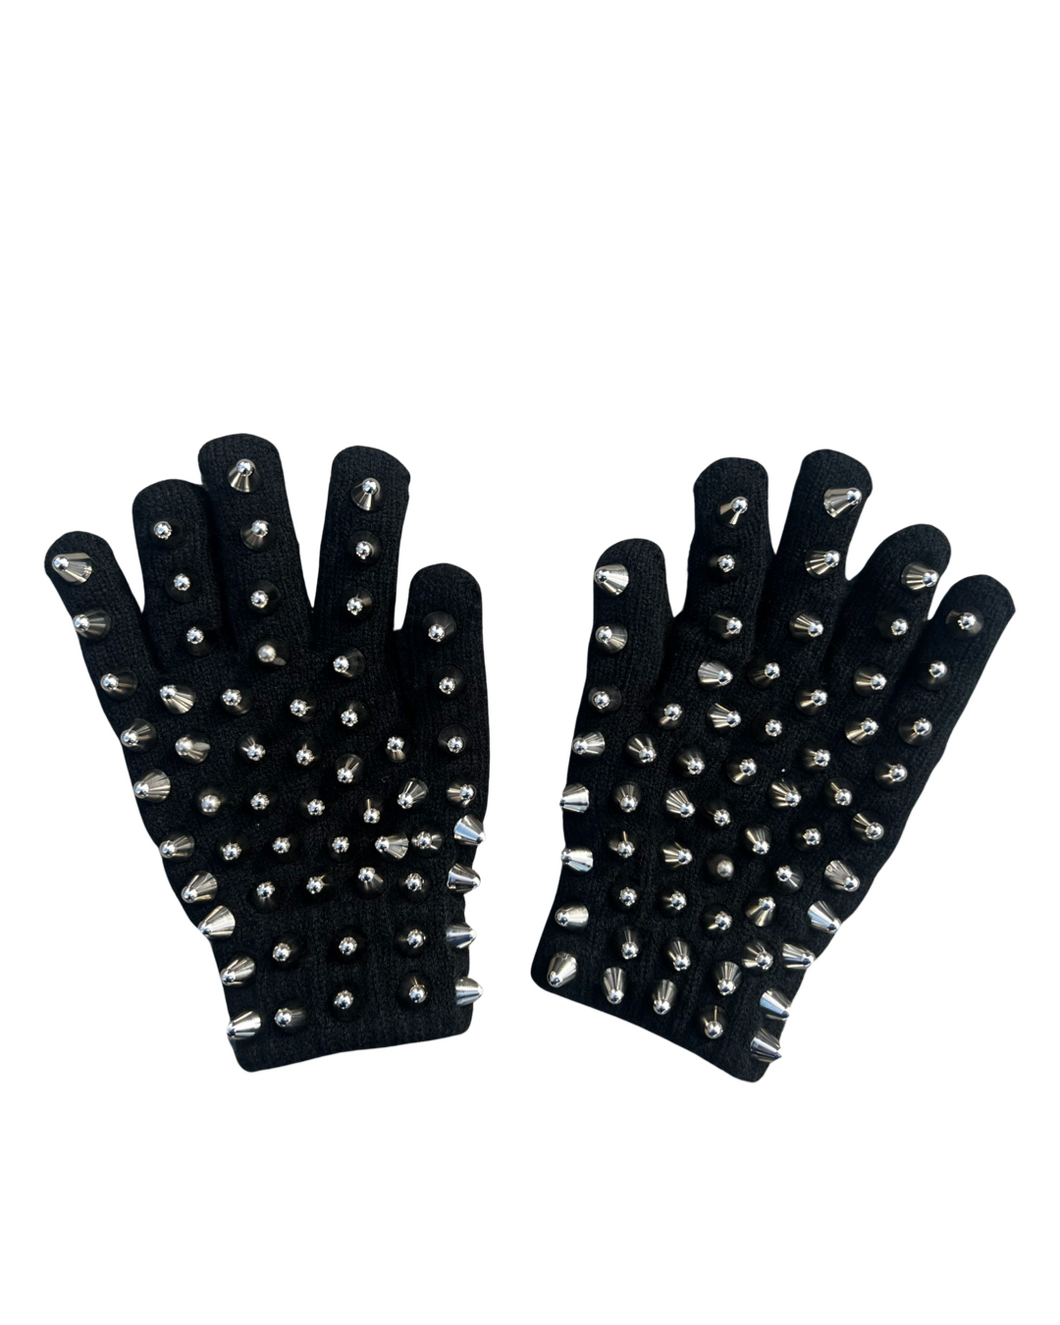 Studmuffin NYC Spike Gloves